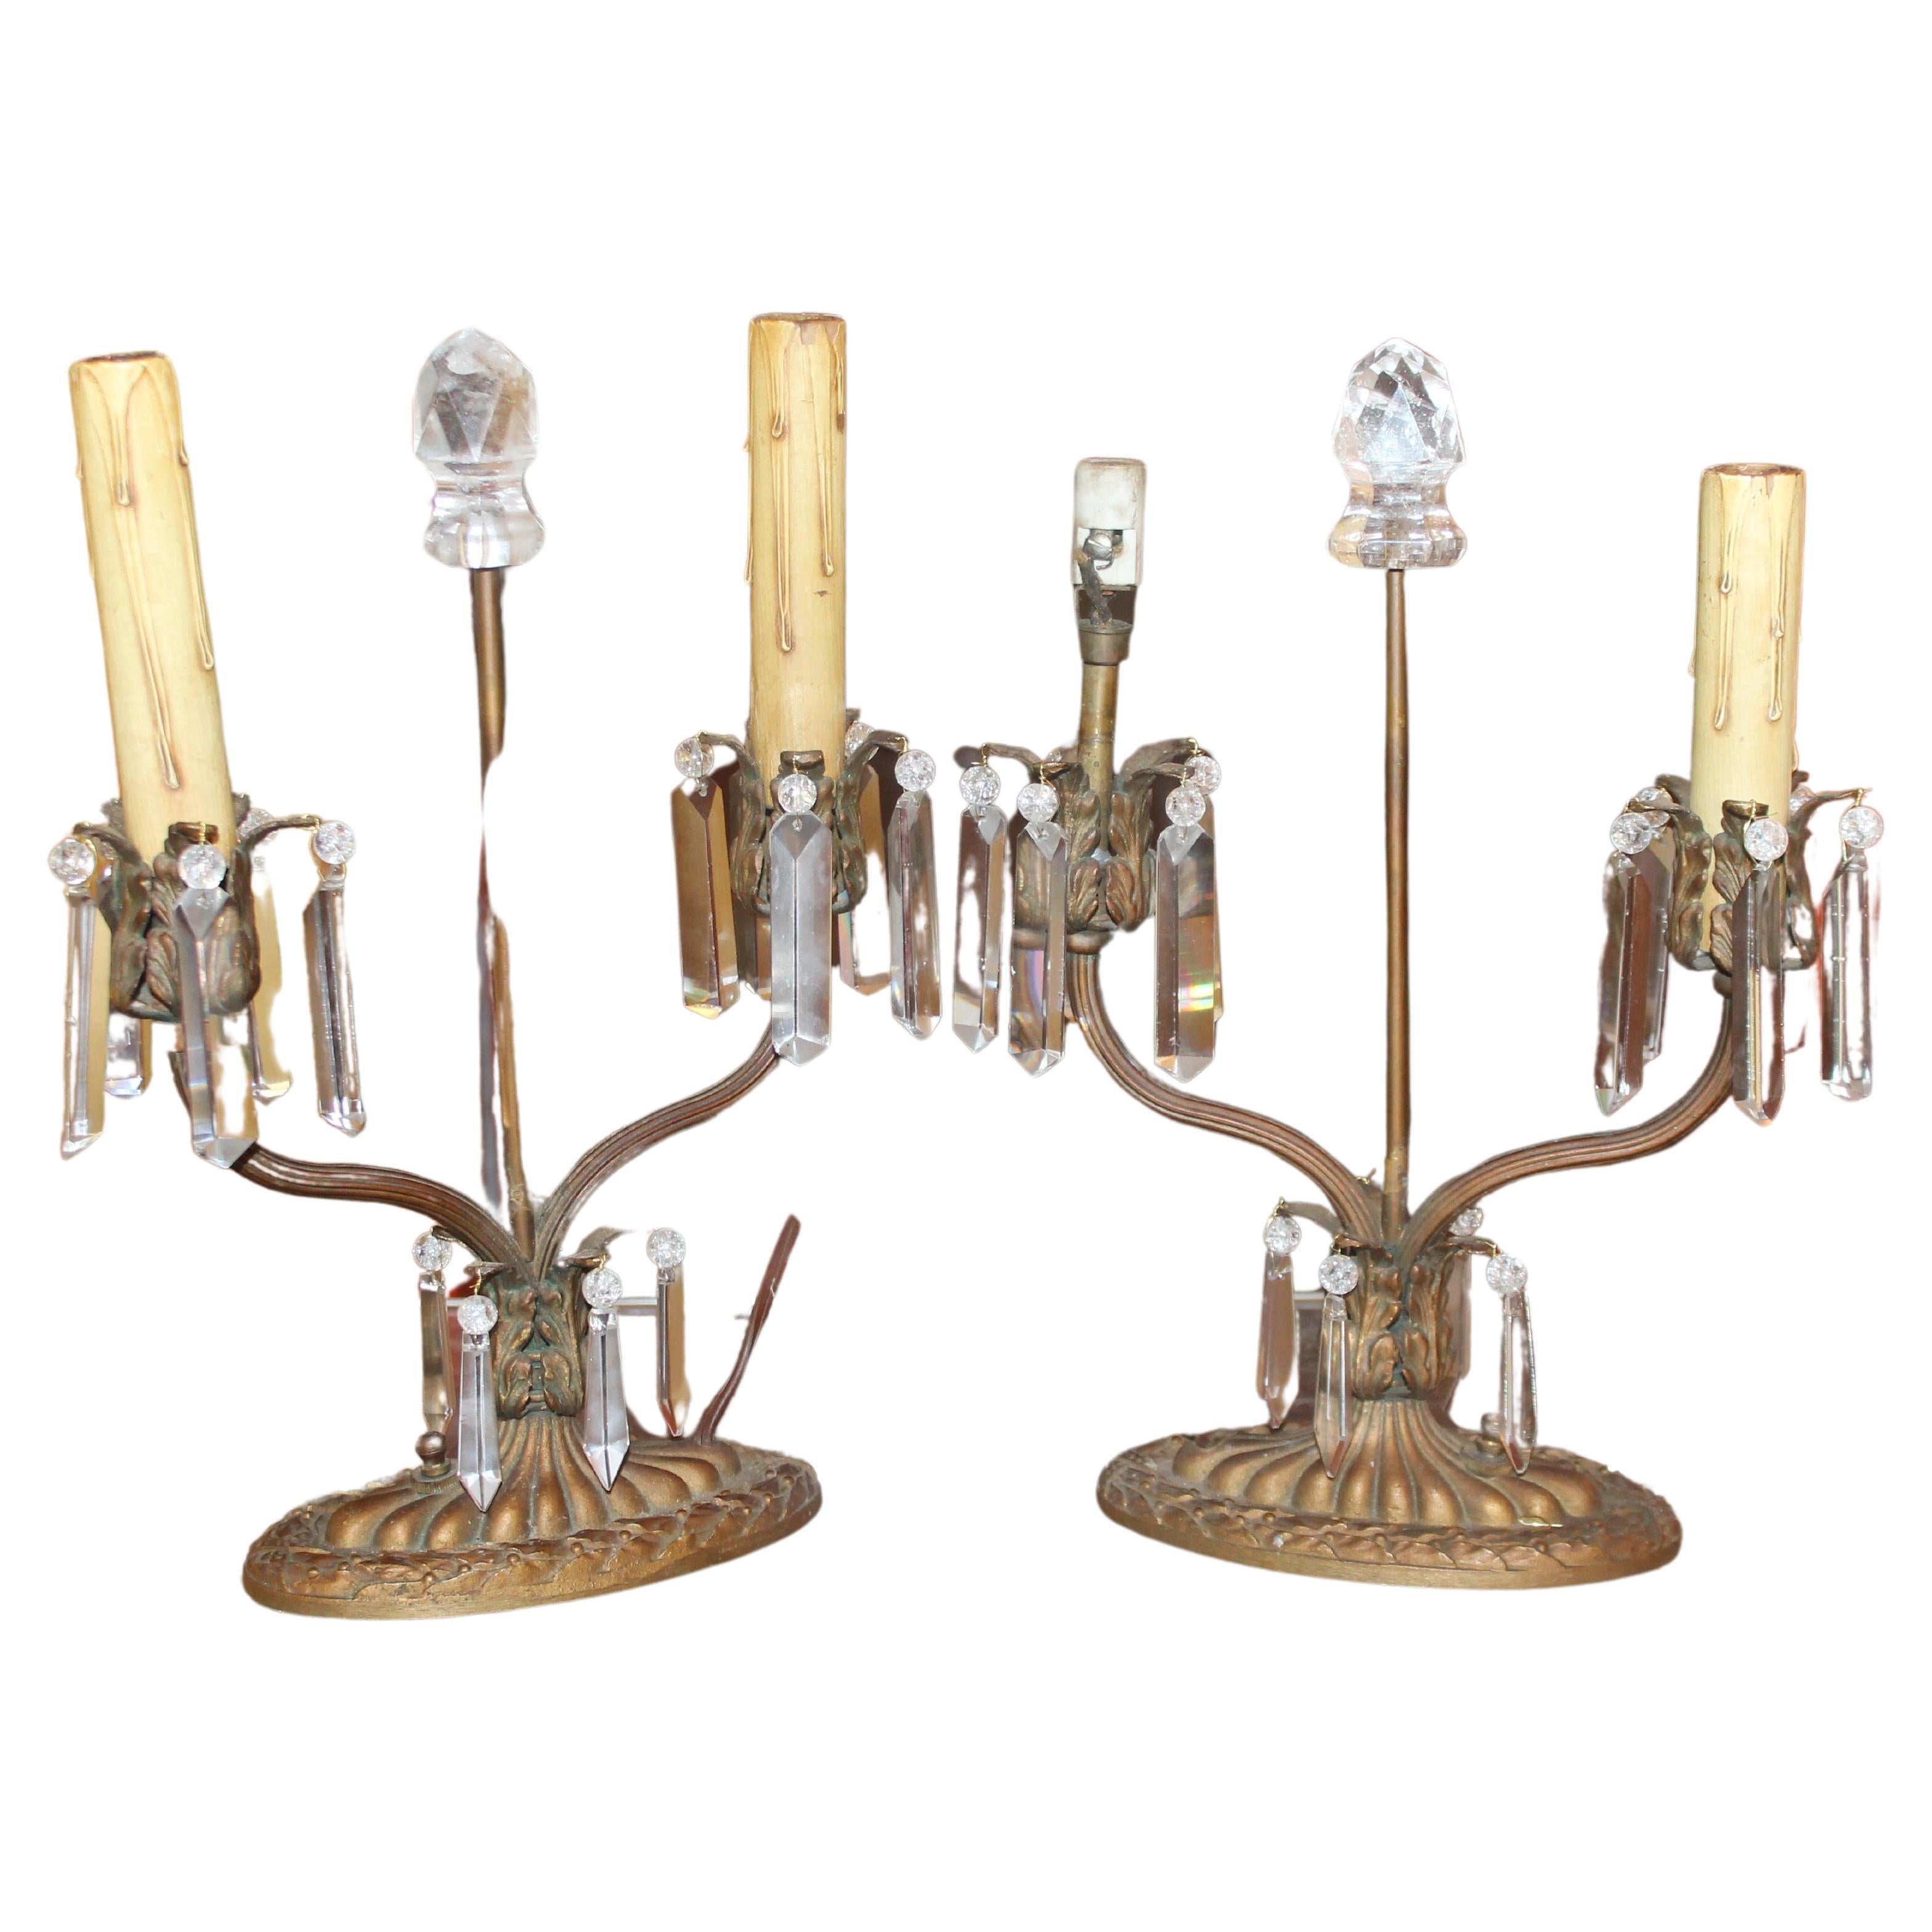 Stunning and Unusual Pair of Girandoles/ Table Lamps. Bronze with cut crstal and Rock Crystal elements. Napoleon III Period 1890. Baccarat crystal was used.